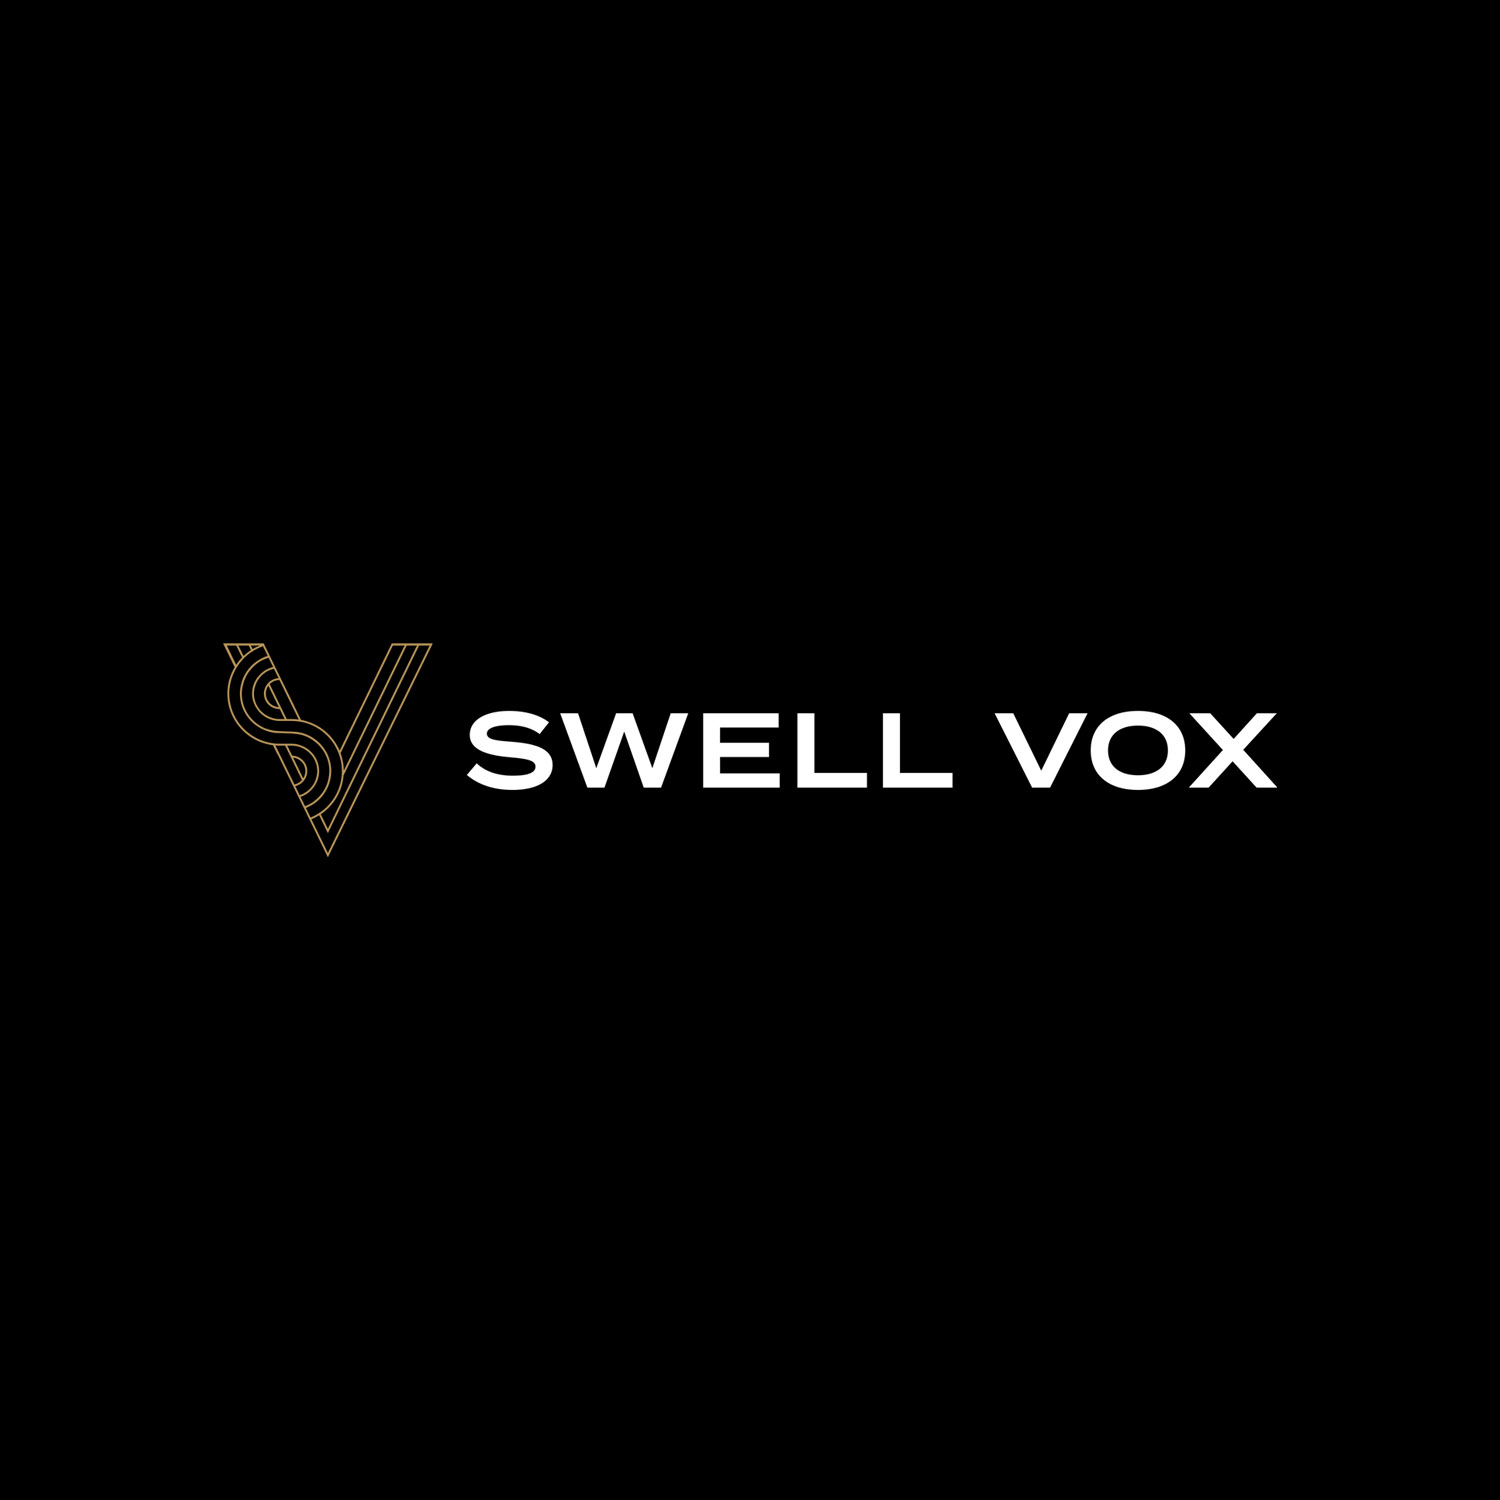 Swell Vox brand identity by Leysa Flores Design